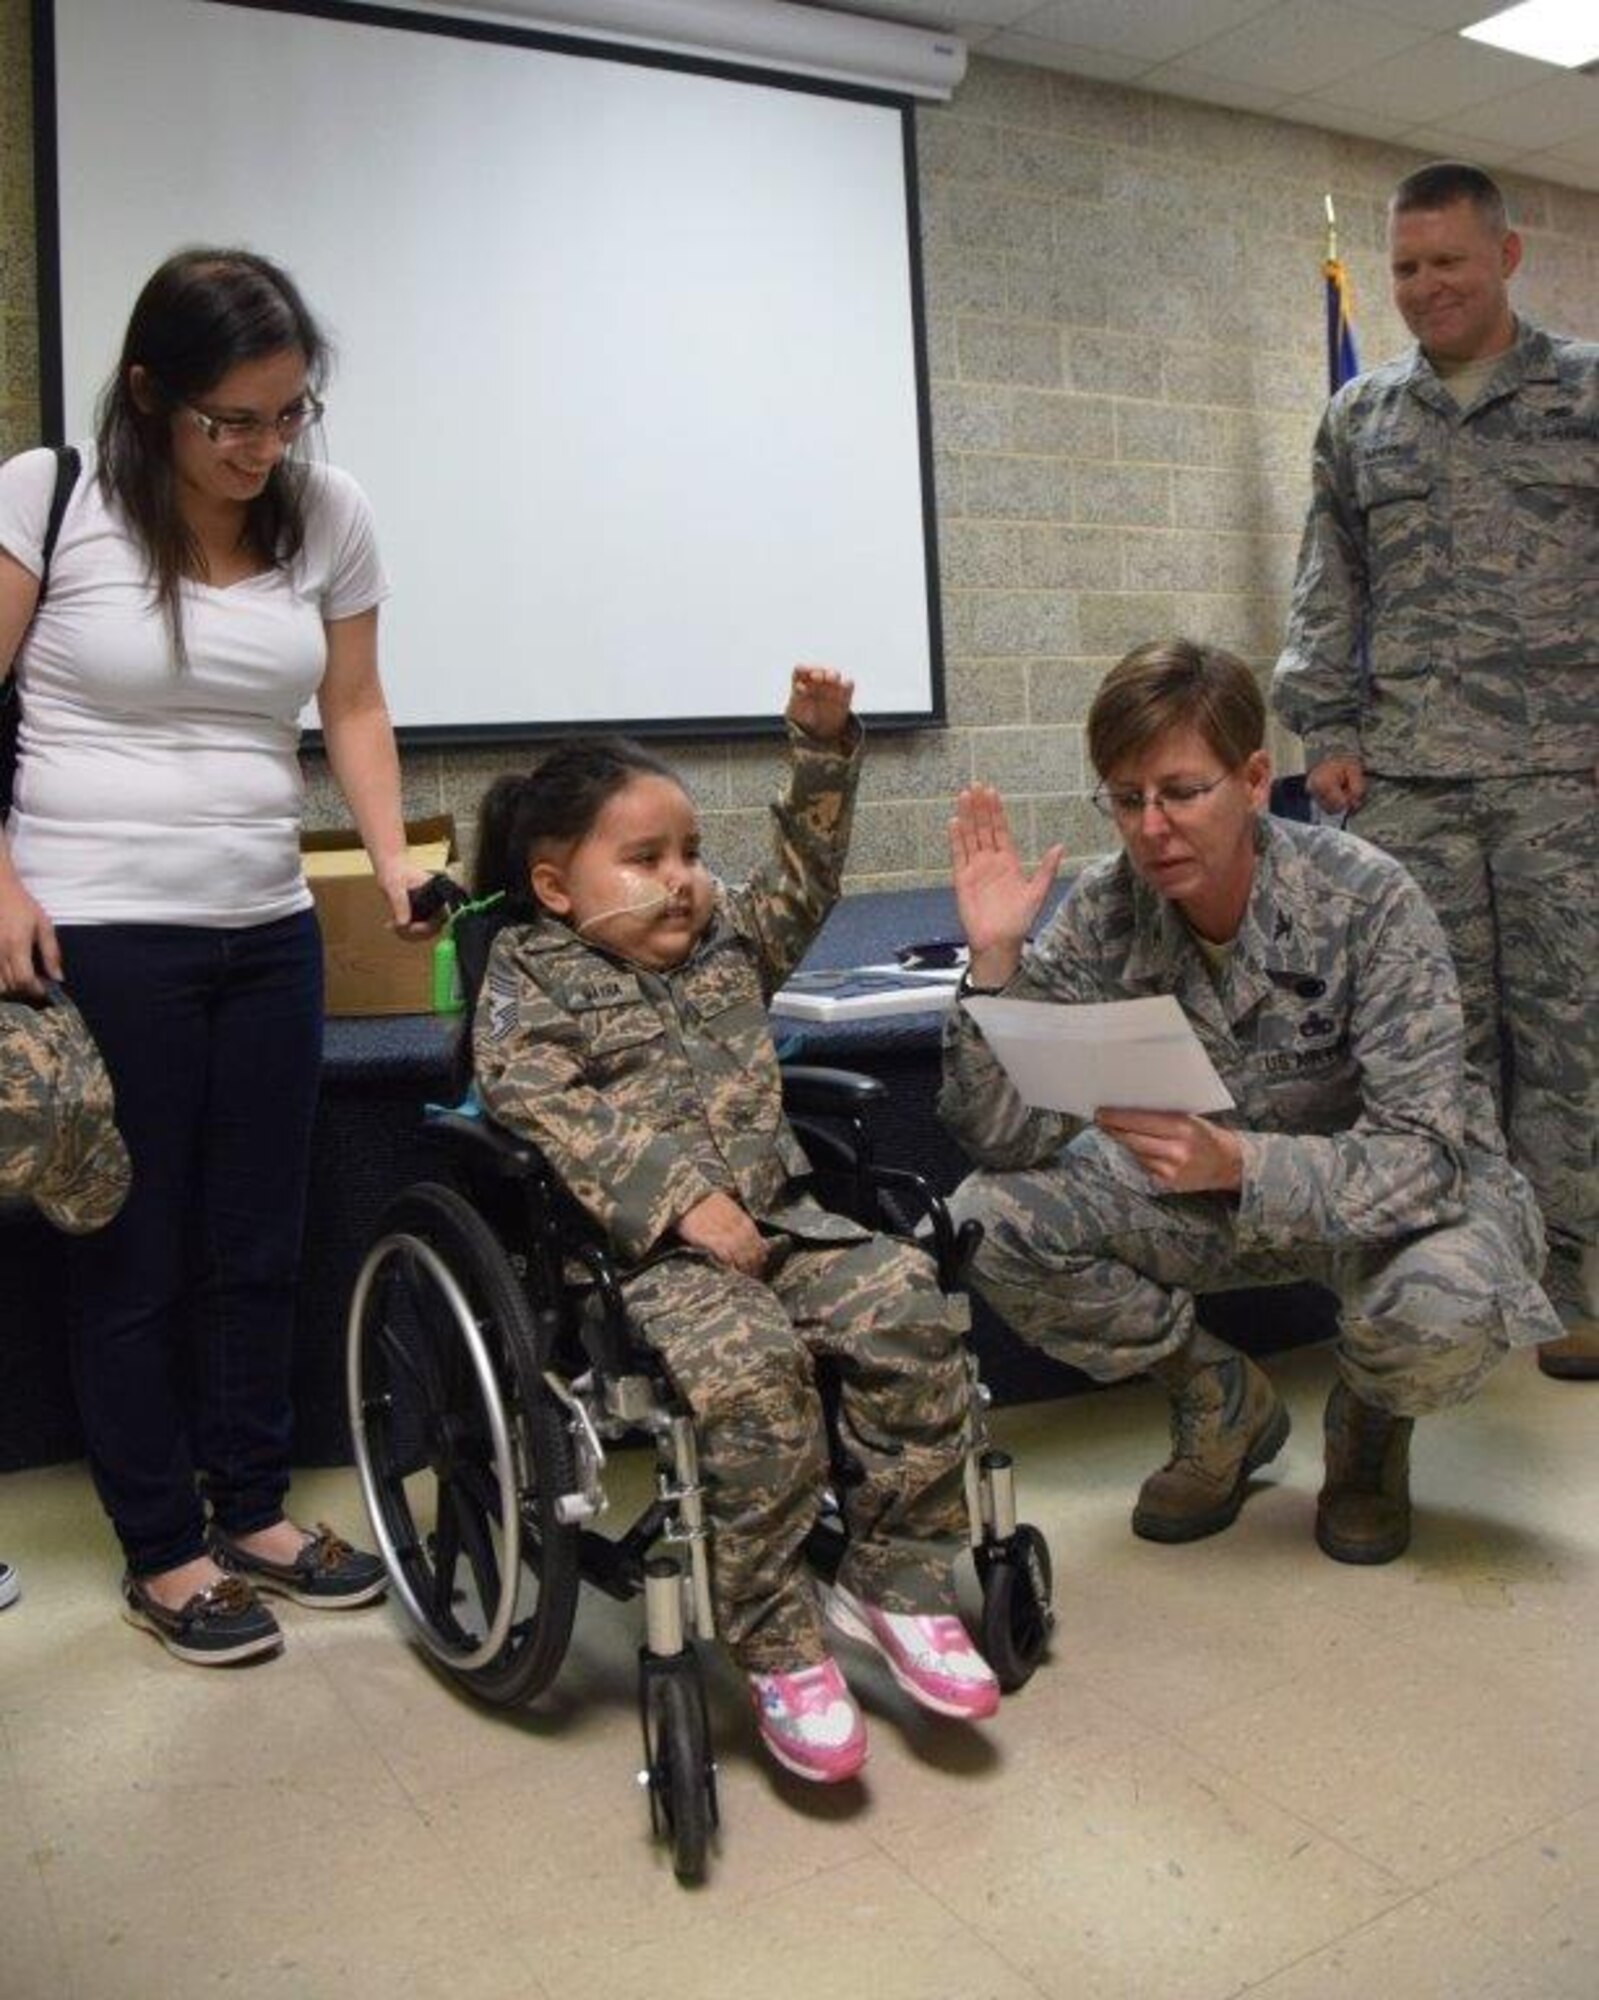 Col. Gretchen Wiltse, right, 433rd Maintenance Group commander, administers a military oath to 5-year-old Mayra Salinas, while the child's mother, Ashley Salinas, observes,  Nov. 5, 2016 at Joint Base San Antonio-Lackland, Texas. Salinas became an honorary member of the Rising 6, a private organization at the 433rd Airlift Wing comprised of Airmen in the grade of E-1 to E-6. (U.S. Air Force photo/Tech. Sgt. Carlos J. Treviño)